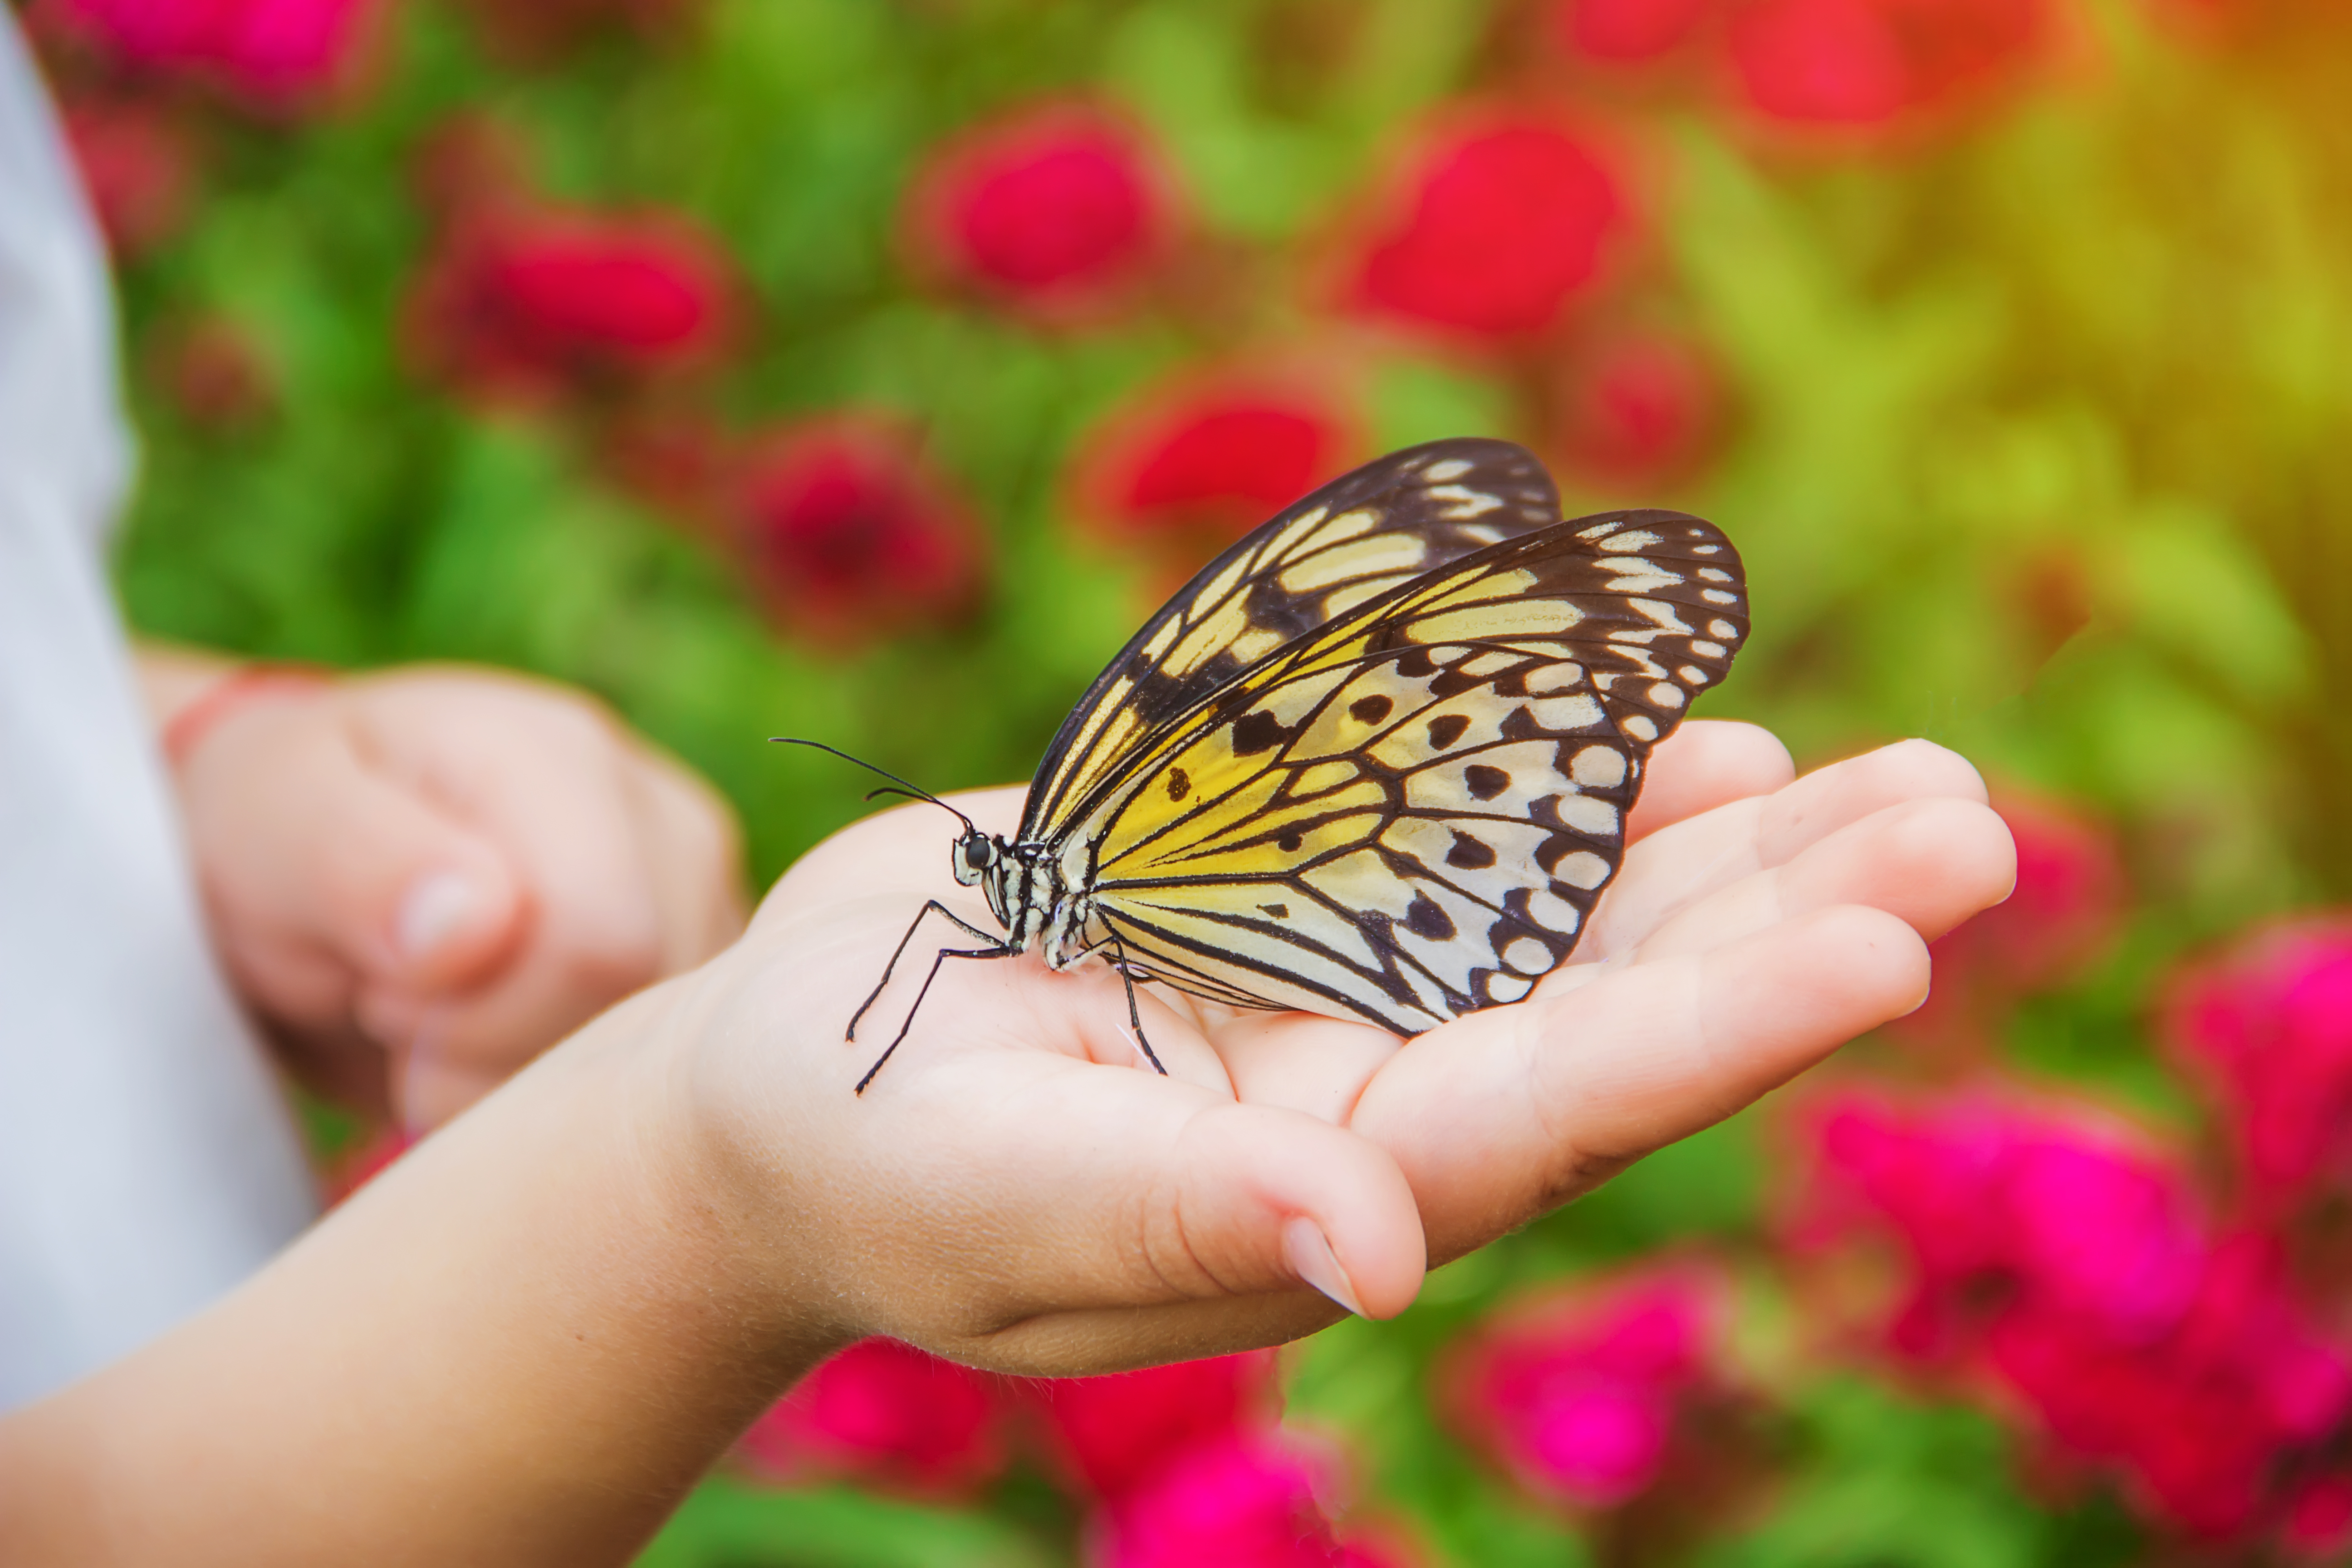 child's hand extended, holding butterfly perched